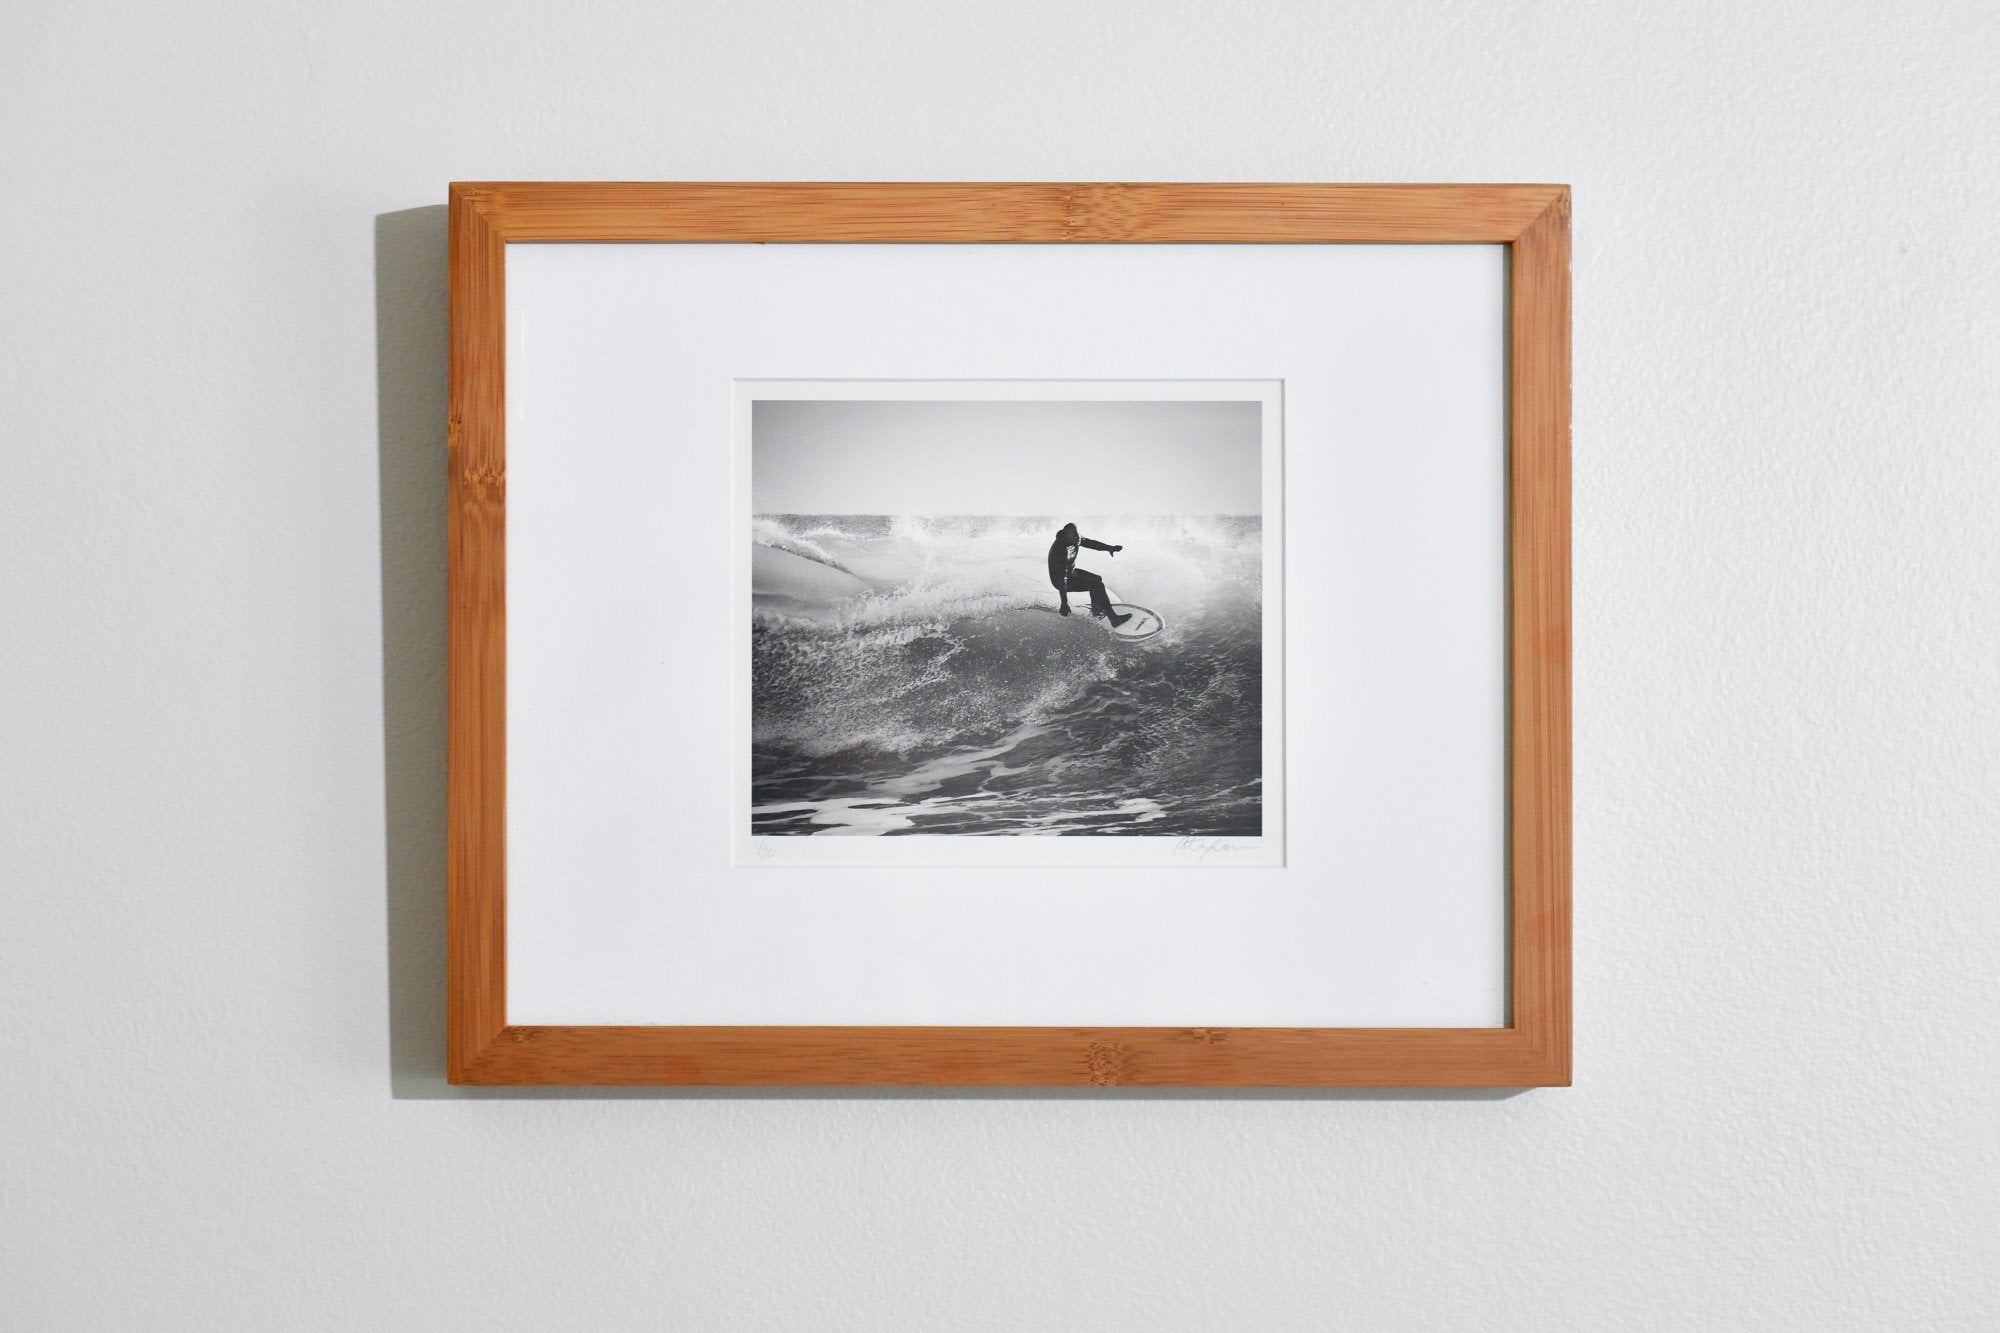 Cate Brown Photo Surfer #3 // Framed Fine Art 11x14" // Limited Edition 1 of 20 Available Inventory Ocean Fine Art